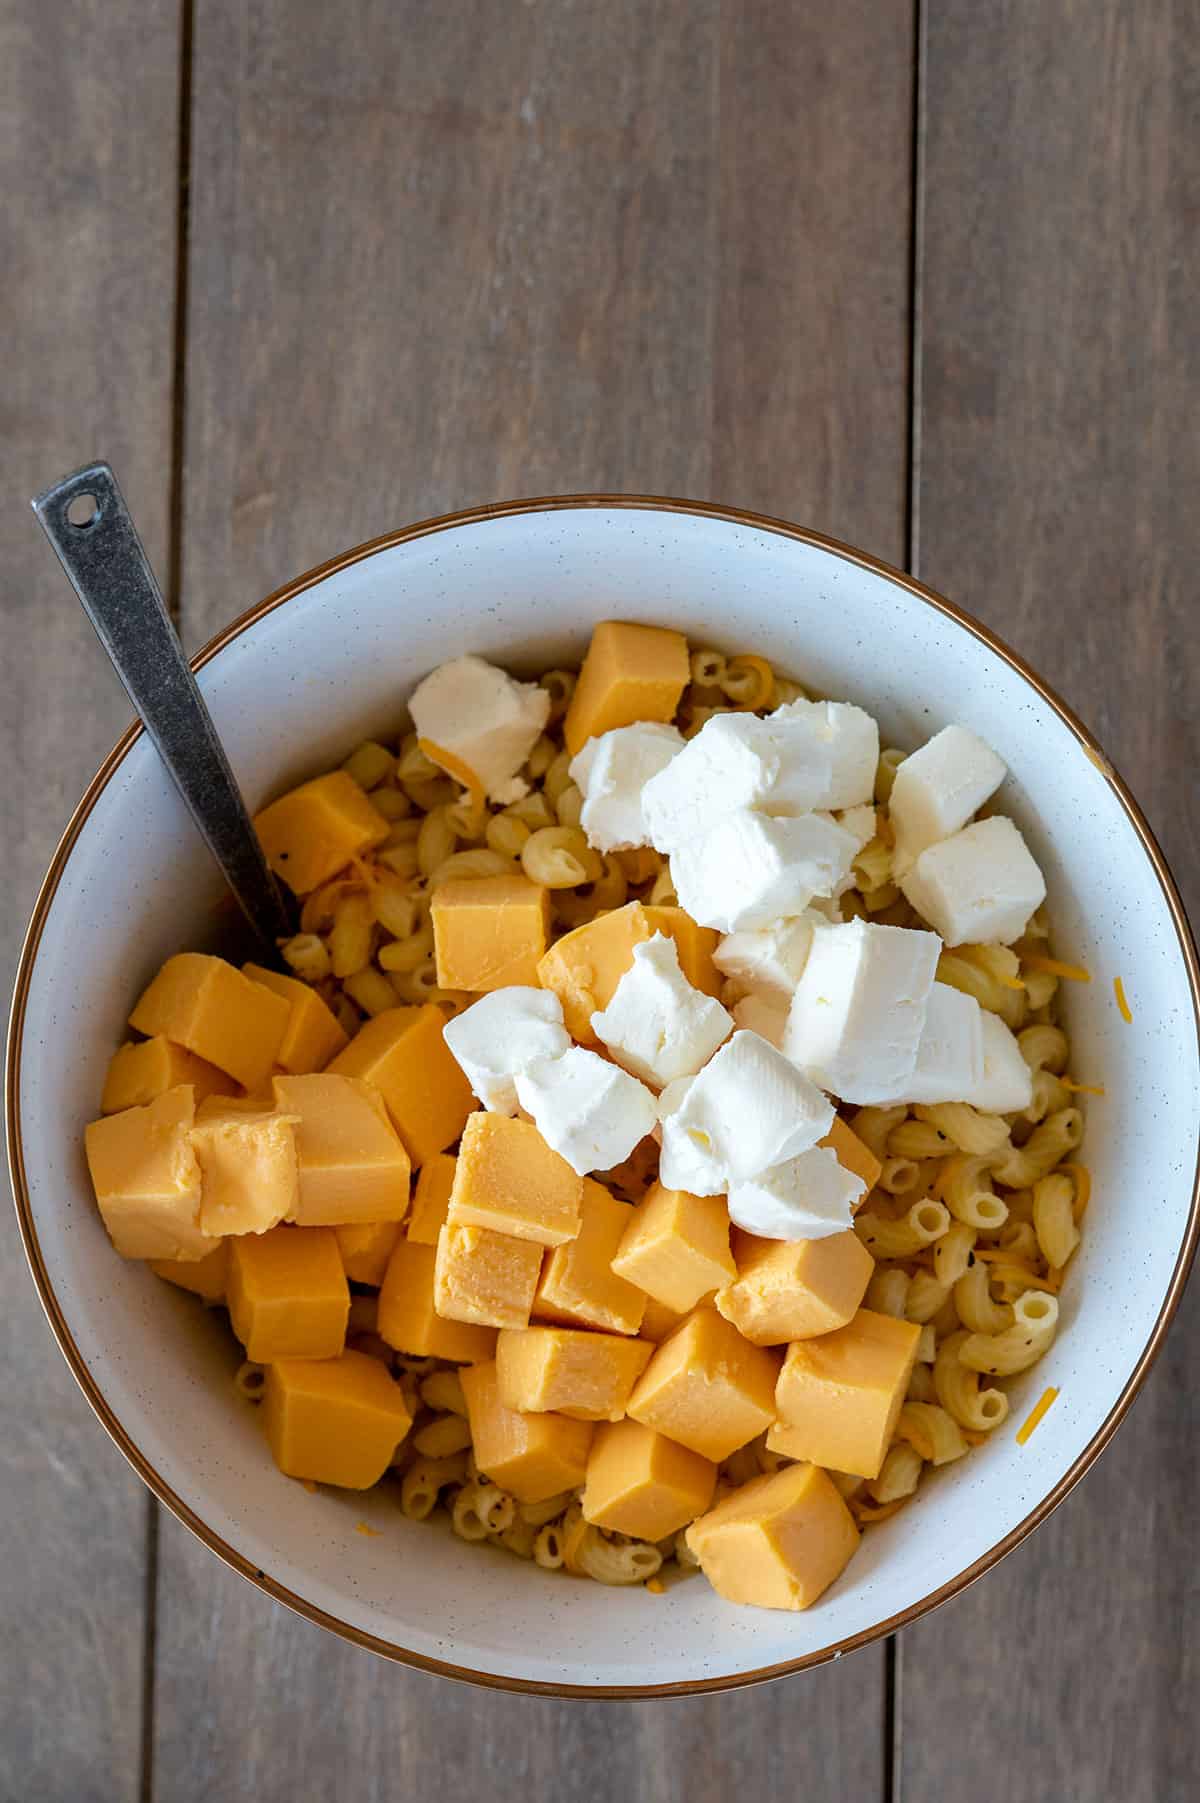 cubed cheeses on top of noodles.